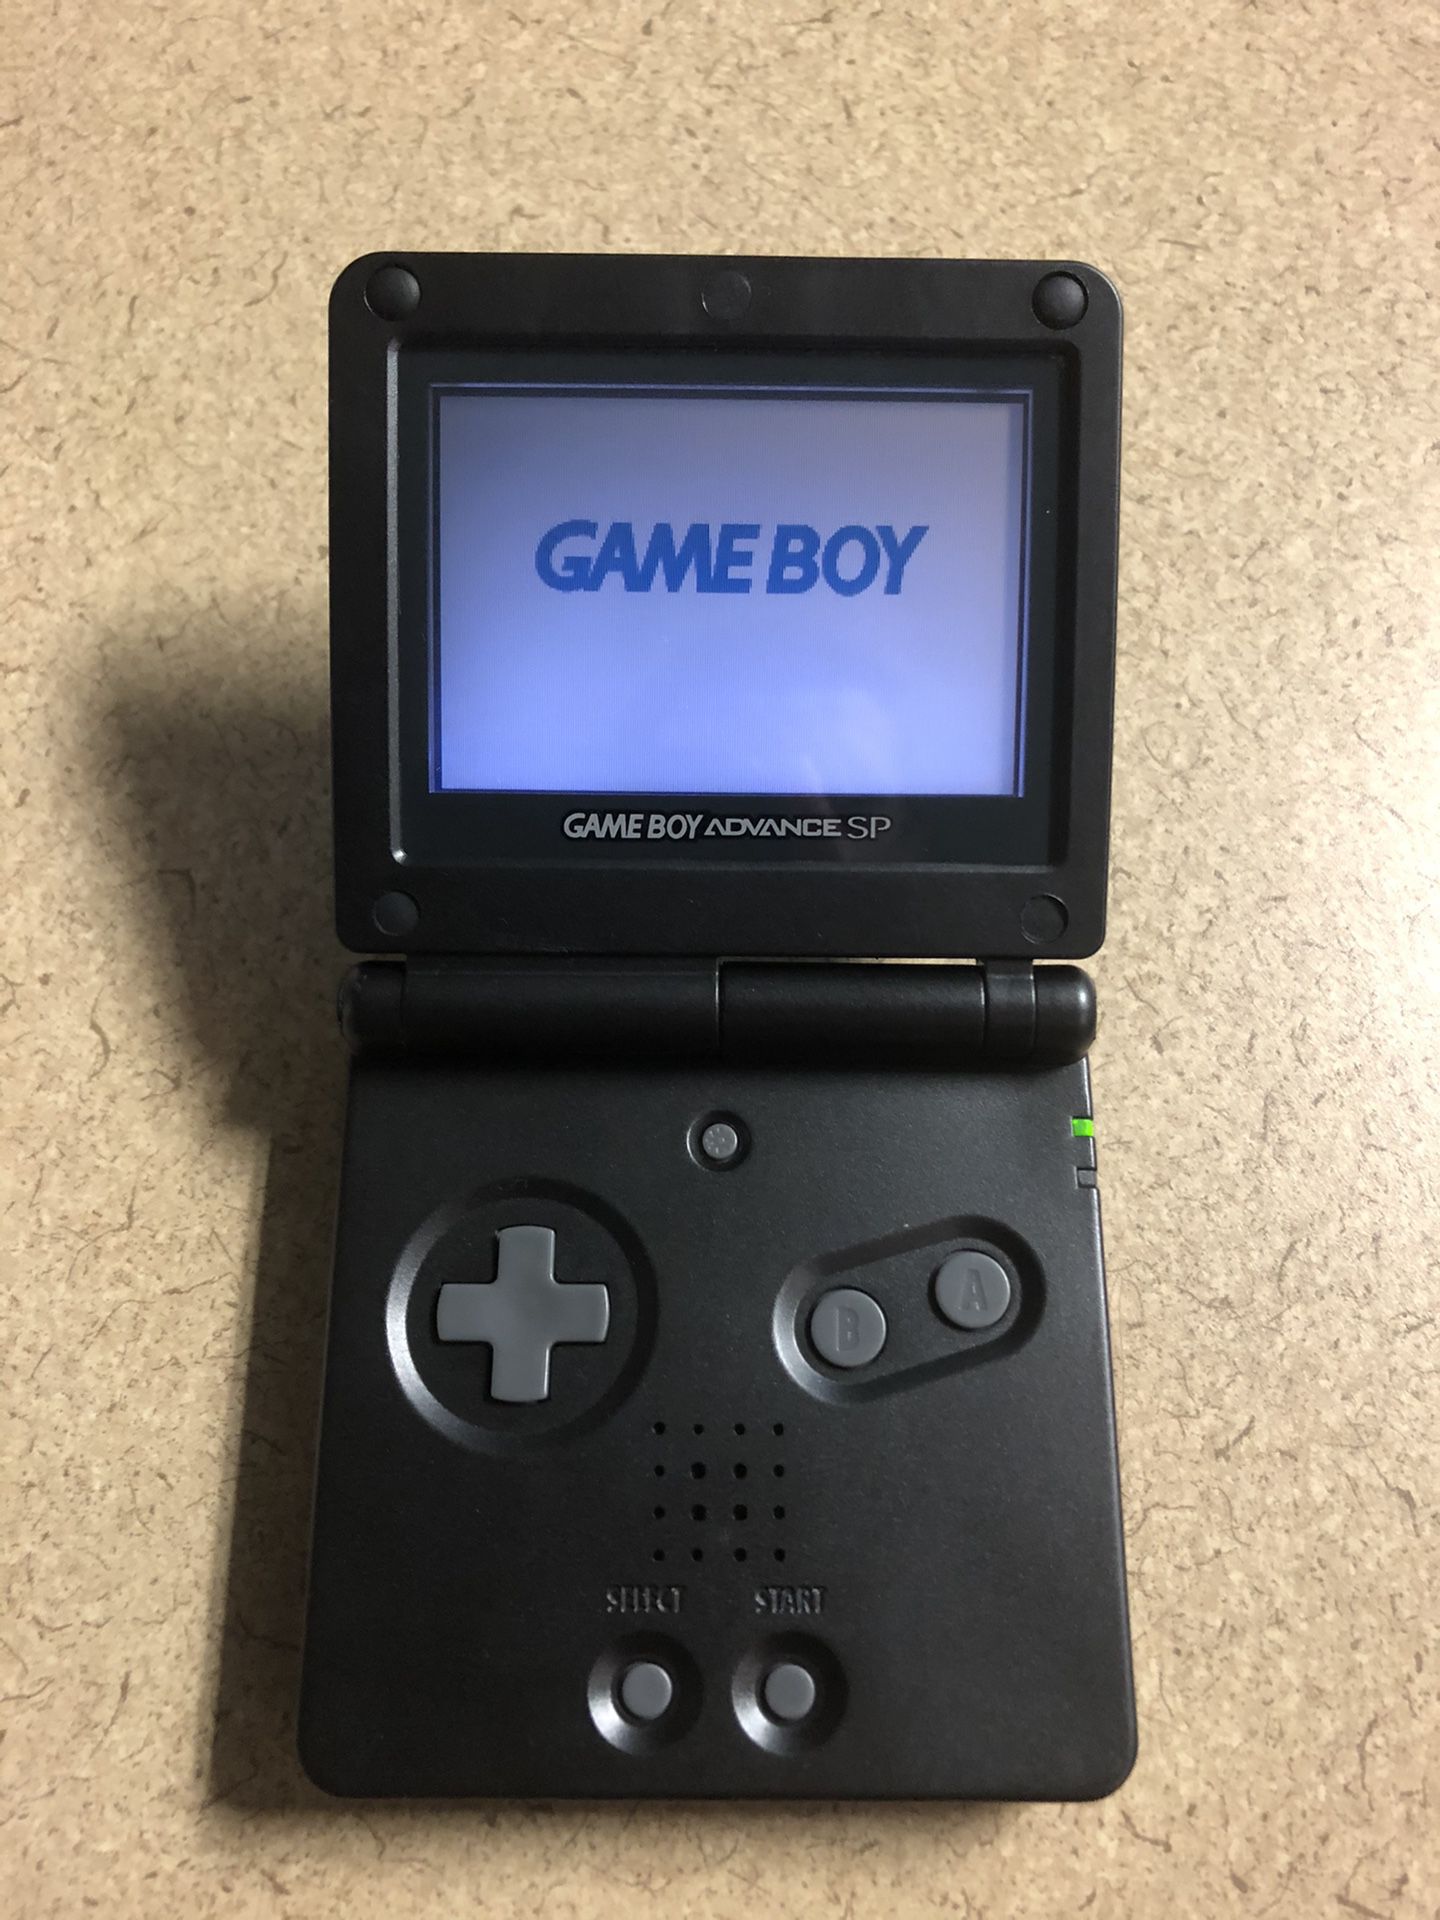 Refurbished Black Gameboy Advance SP GBA AGS 001 w/ Charger